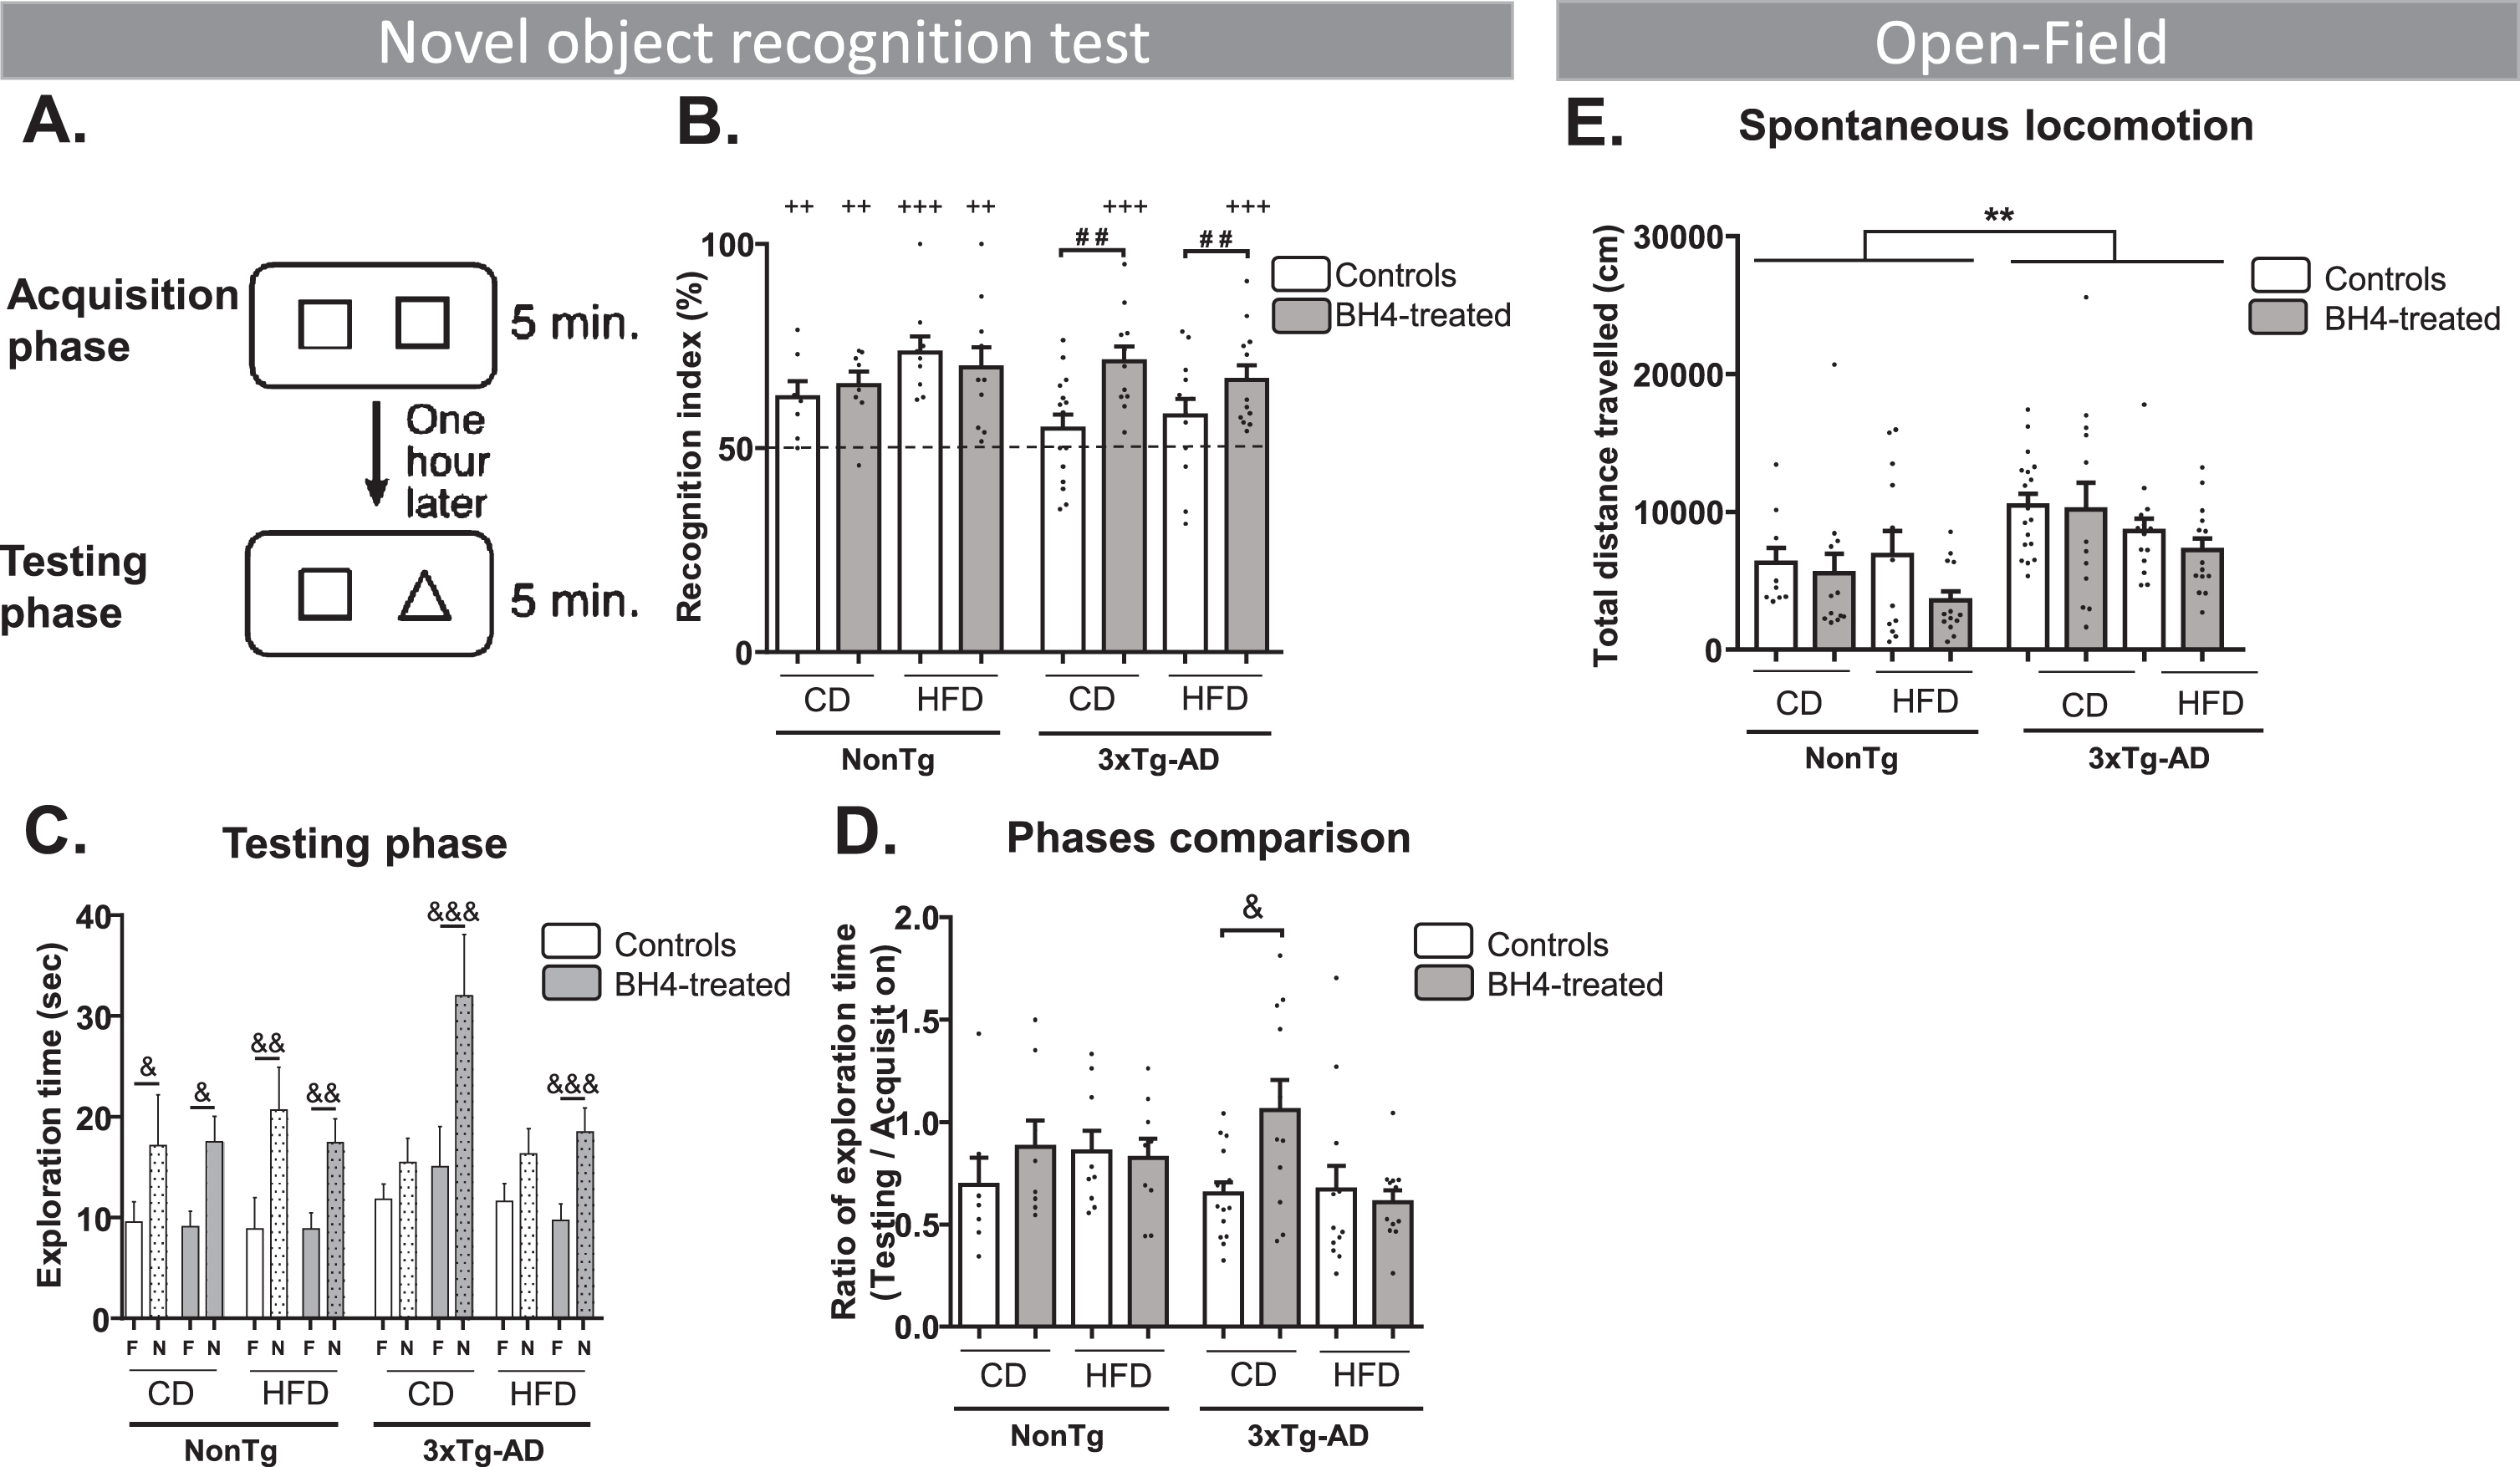 BH4 administration improves recognition memory function in 3xTg-AD mice without affecting spontaneous locomotion. A) Recognition memory was evaluated using the novel object recognition (NOR) test. B) Recognition index: (time exploring the novel (N) object/total time exploring both N and familiar (F) objects during the testing phase)*100. C) Total exploration time of the N and the F objects during the testing phase. D) Ratio of total exploration time during the testing phase/acquisition phase. E) Spontaneous locomotion monitored for 1 h in an open-field (total distance travelled in cm). Values are represented as mean±SEM with N = 7–17/group. Statistical analyses: (B) ++p < 0.01; +++p < 0.001 compared to random selection of an object (one sample t-test versus 50%); # #p = 0.0013 (Effect of BH4 Treatment, two-way ANOVA within 3xTg-AD mice); (C) &p < 0.05, &&p < 0.01, &&&p < 0.001 between N and F objects (Wilcoxon matched paired rank test); (D) &p < 0.05 (Wilcoxon matched paired rank test); (E) **p < 0.01 Genotype effect, (Multimodal ANOVA).